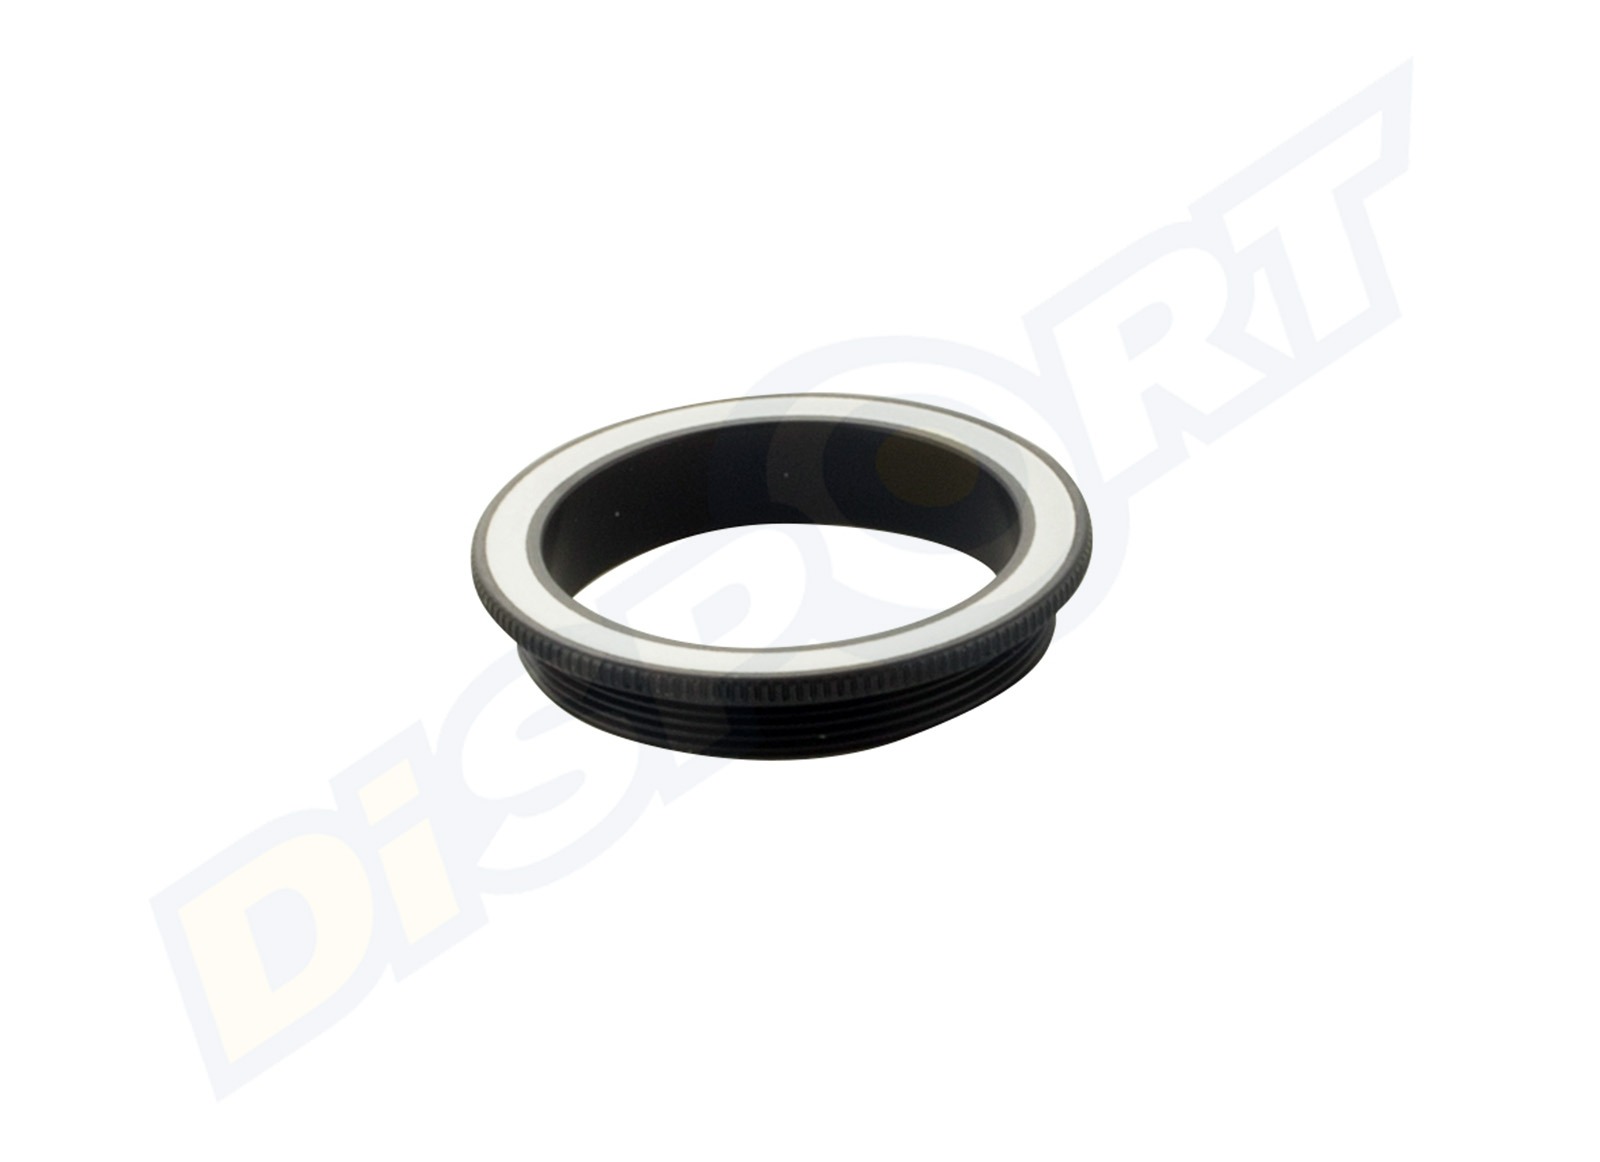 SHREWD PEEP SIGHT CENTERING RING WITH WHITE RING